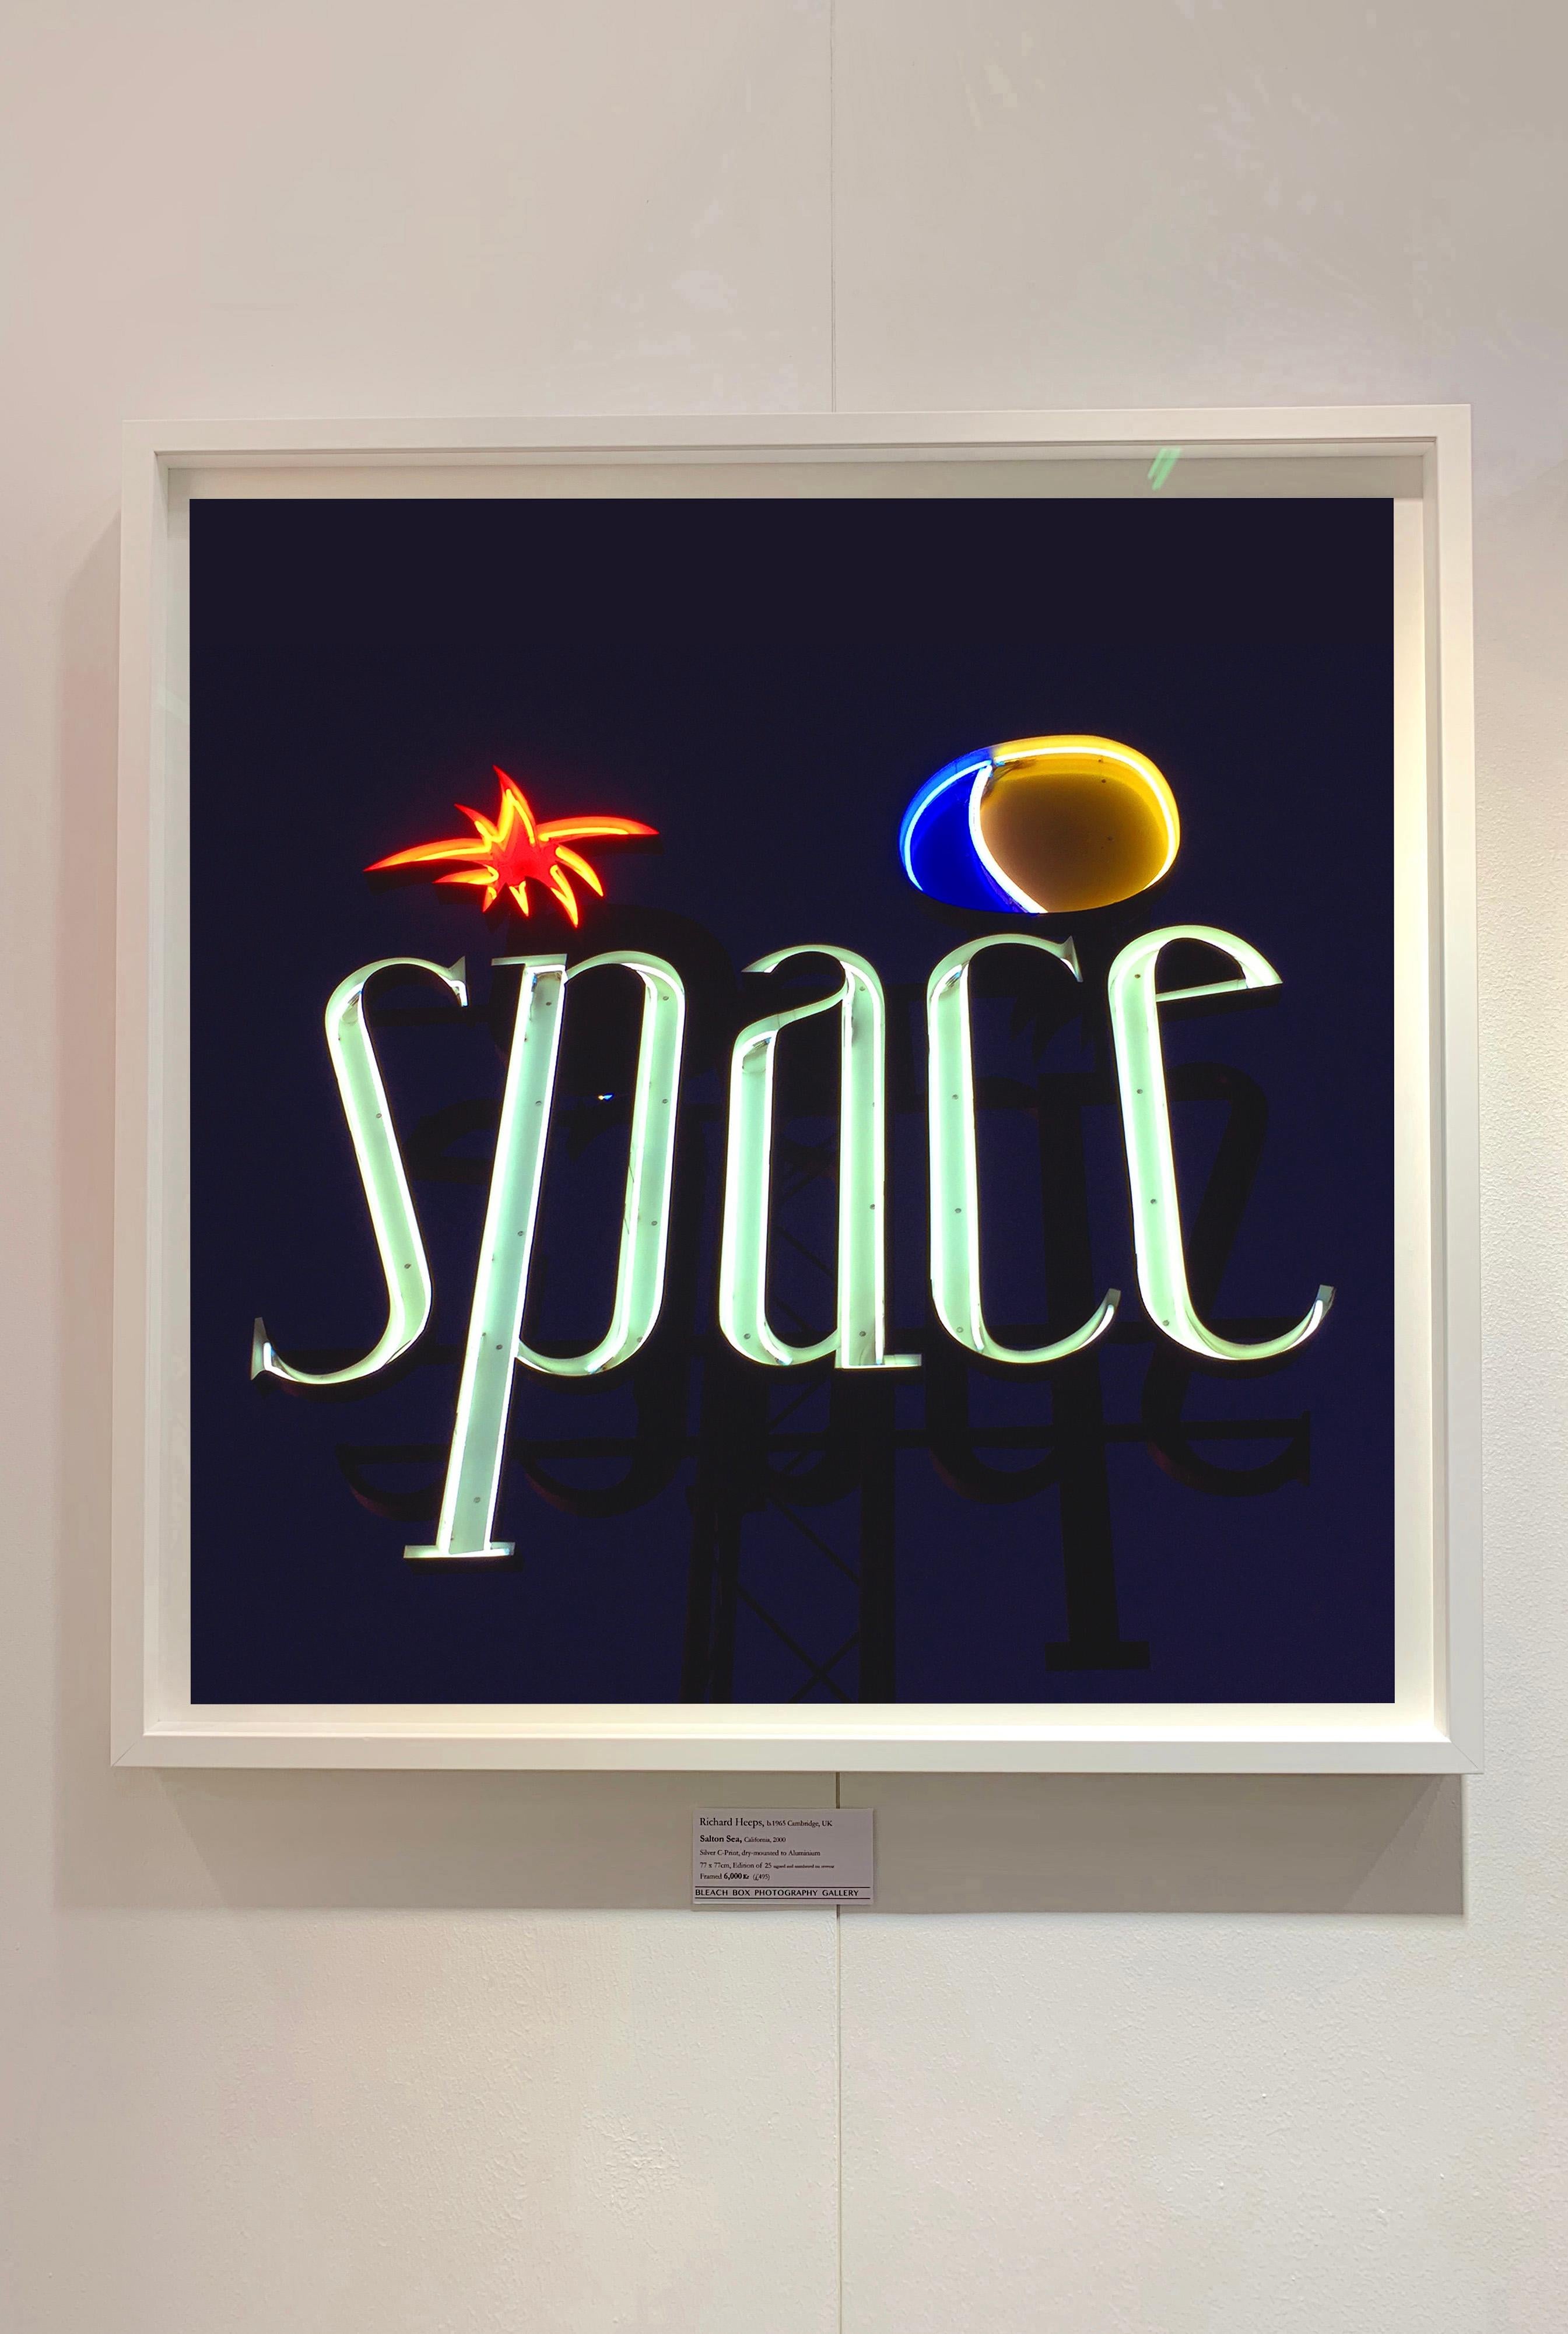 Space, Ibiza, The Balearic Islands.
The neon sign of the iconic Ibiza superclub Space, photographed during its final year of existence. The neon lights of bold graphic typography pop against the night sky.

This artwork is an artist proof, gloss